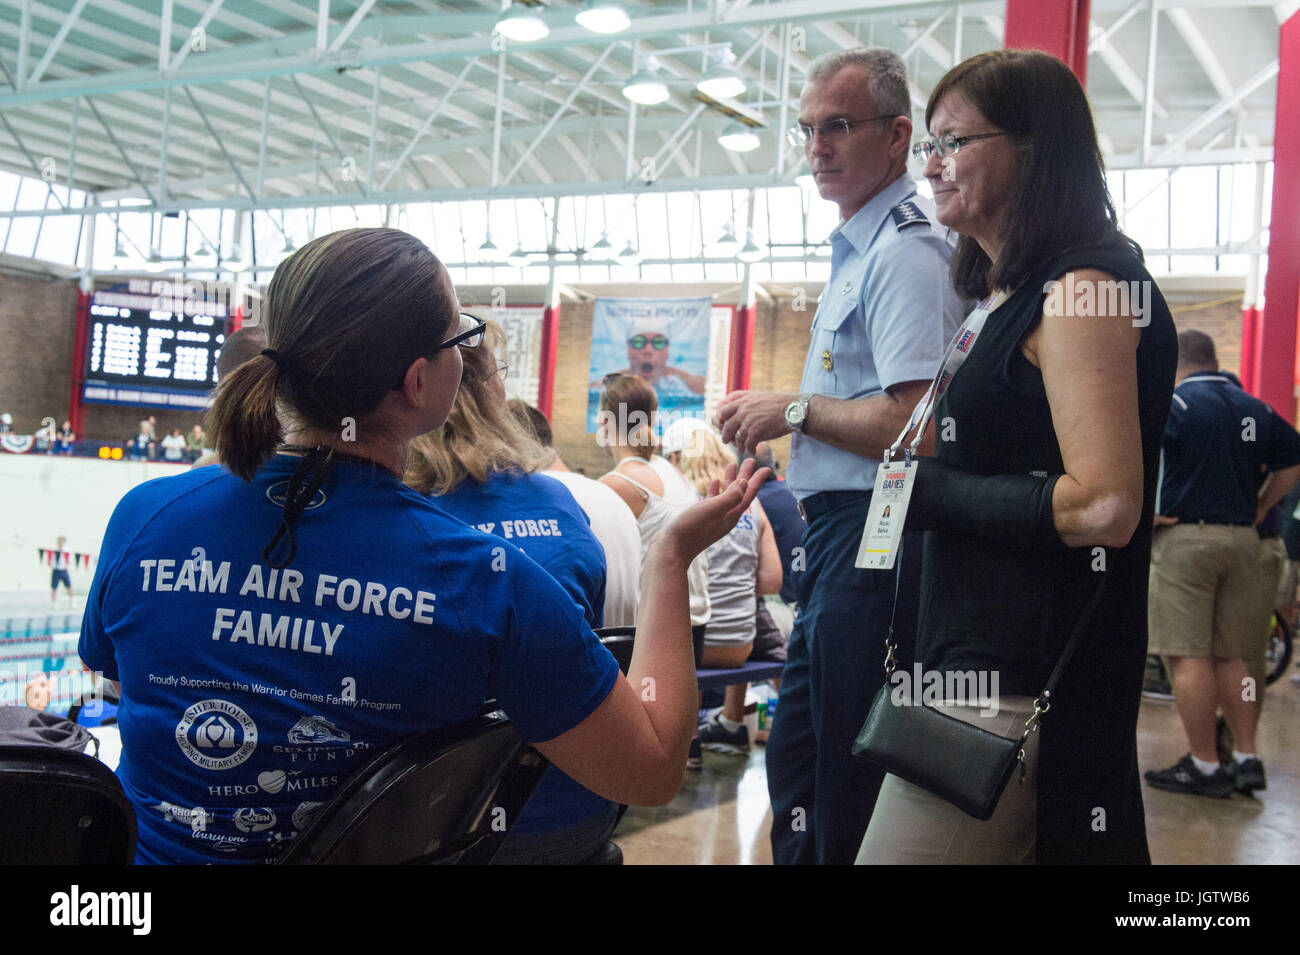 Mrs. Ricki Selva, right, wife of U.S. Air Force Gen. Paul J. Selva, Vice Chairman of the Joint Chiefs of Staff, center, speaks with a Team Air Force family member during the swimming competition of the 2017 Department of Defense (DoD) Warrior Games at the University of Illinois, Chicago, Ill., July 8, 2017. The DoD Warrior Games are an annual event allowing wounded, ill and injured service members and veterans to compete in Paralympic-style sports. (DoD Photo by U.S. Army Sgt. James K. McCann) Stock Photo